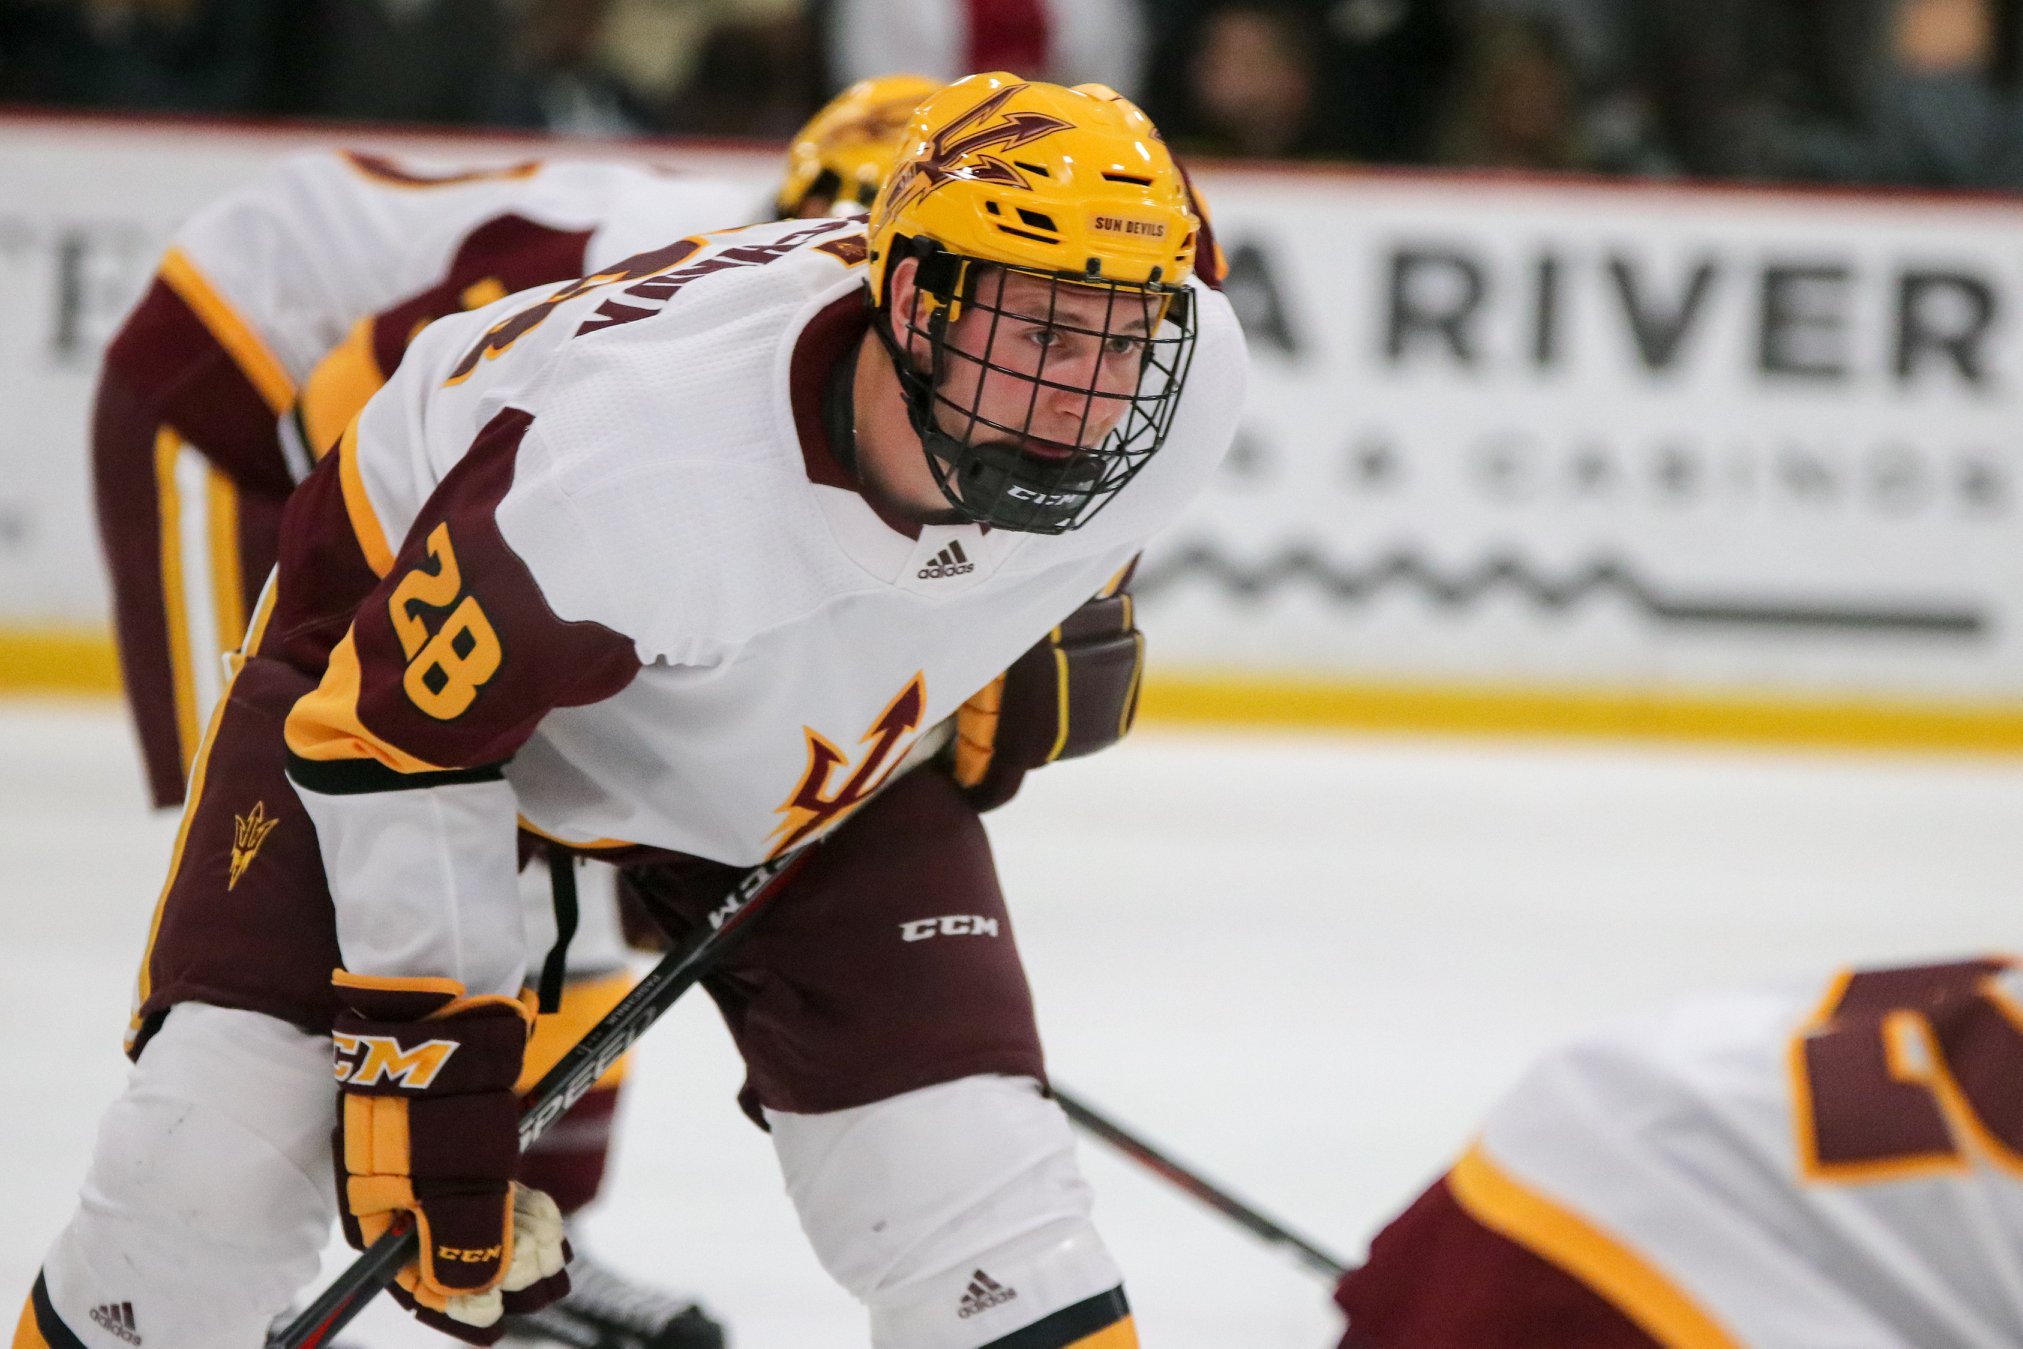 ASU Men's Hockey Physical fourth line injecting energy, confidence